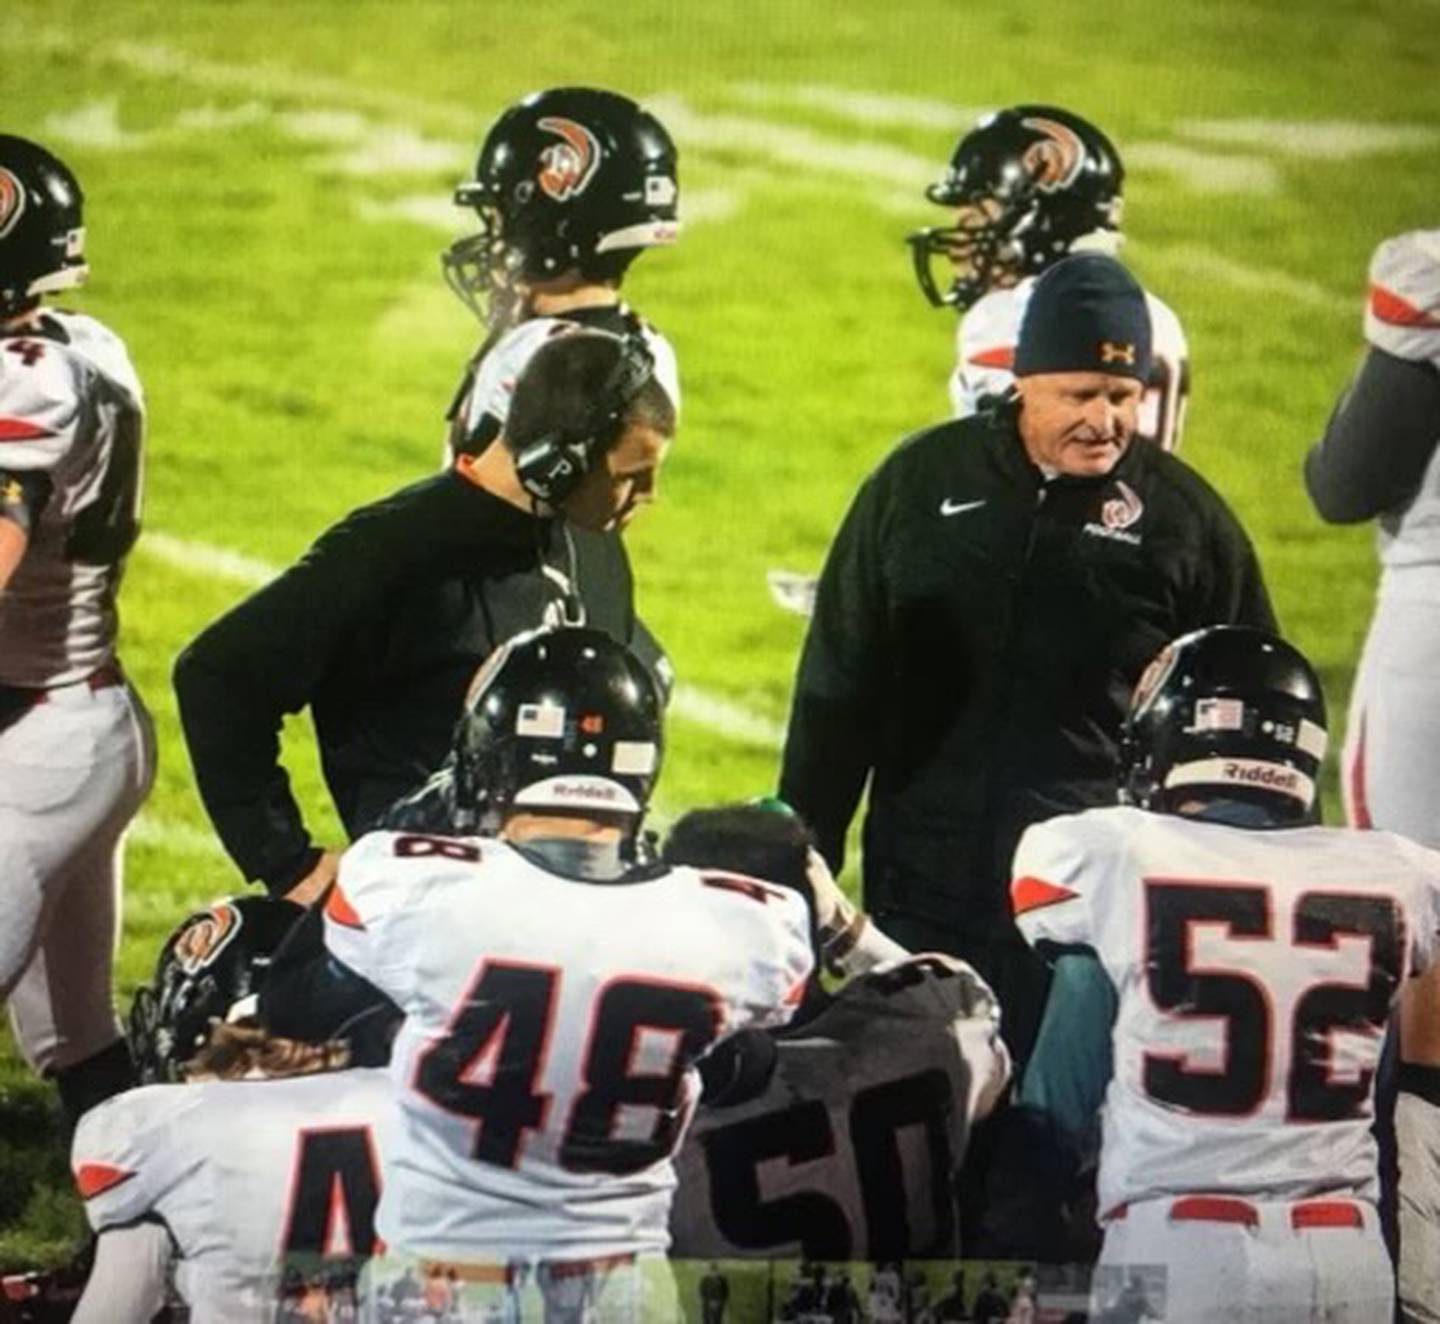 Larry Lokanc (right) talks to the players at Lincoln-Way West during a game.